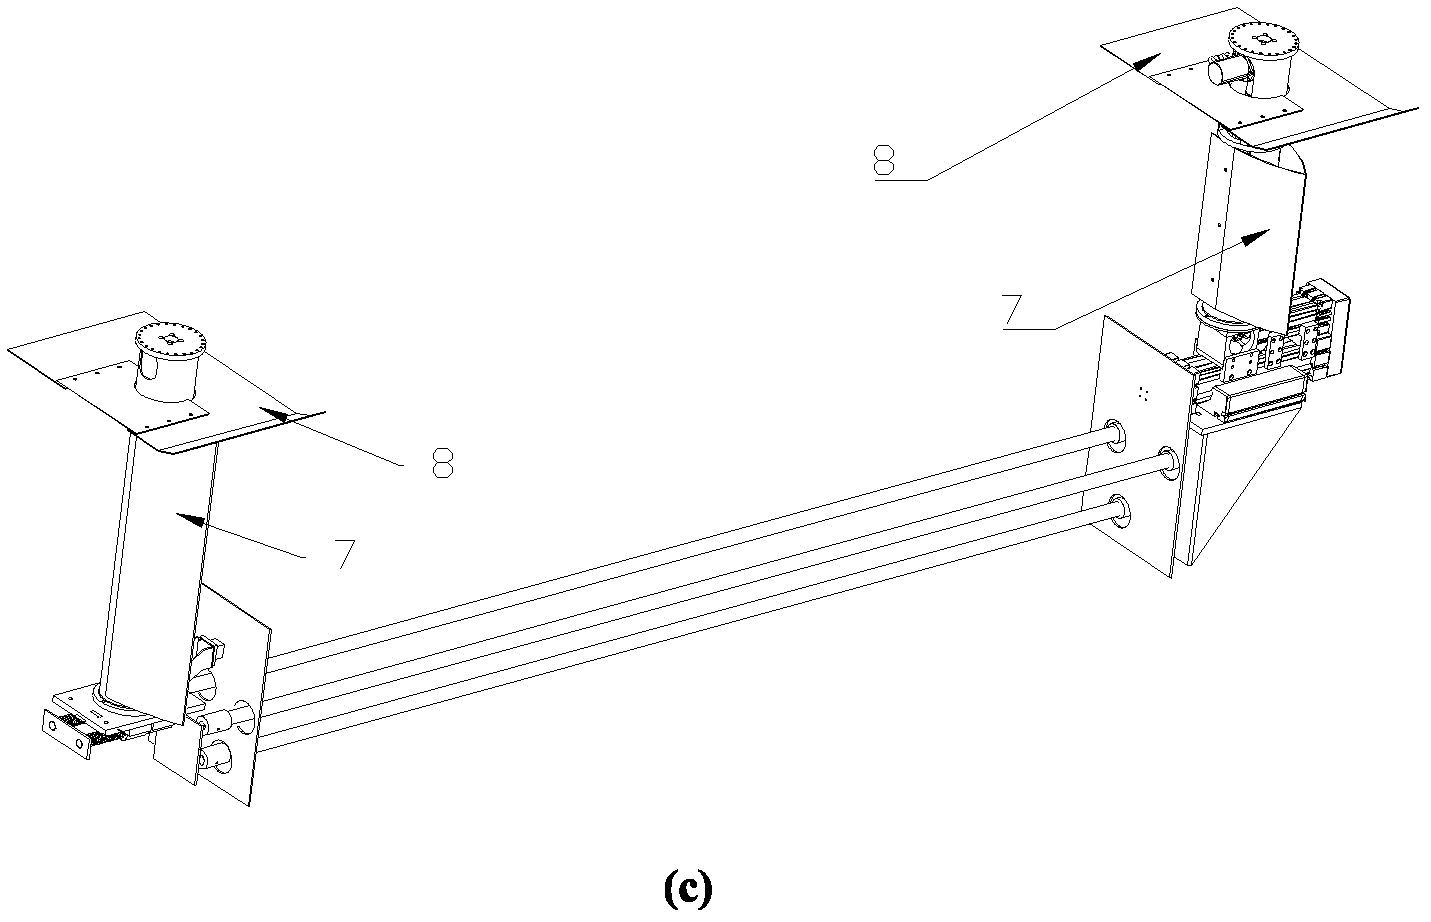 A vortex-induced simulation test device for a deep-sea riser array model subjected to pretension under uniform flow